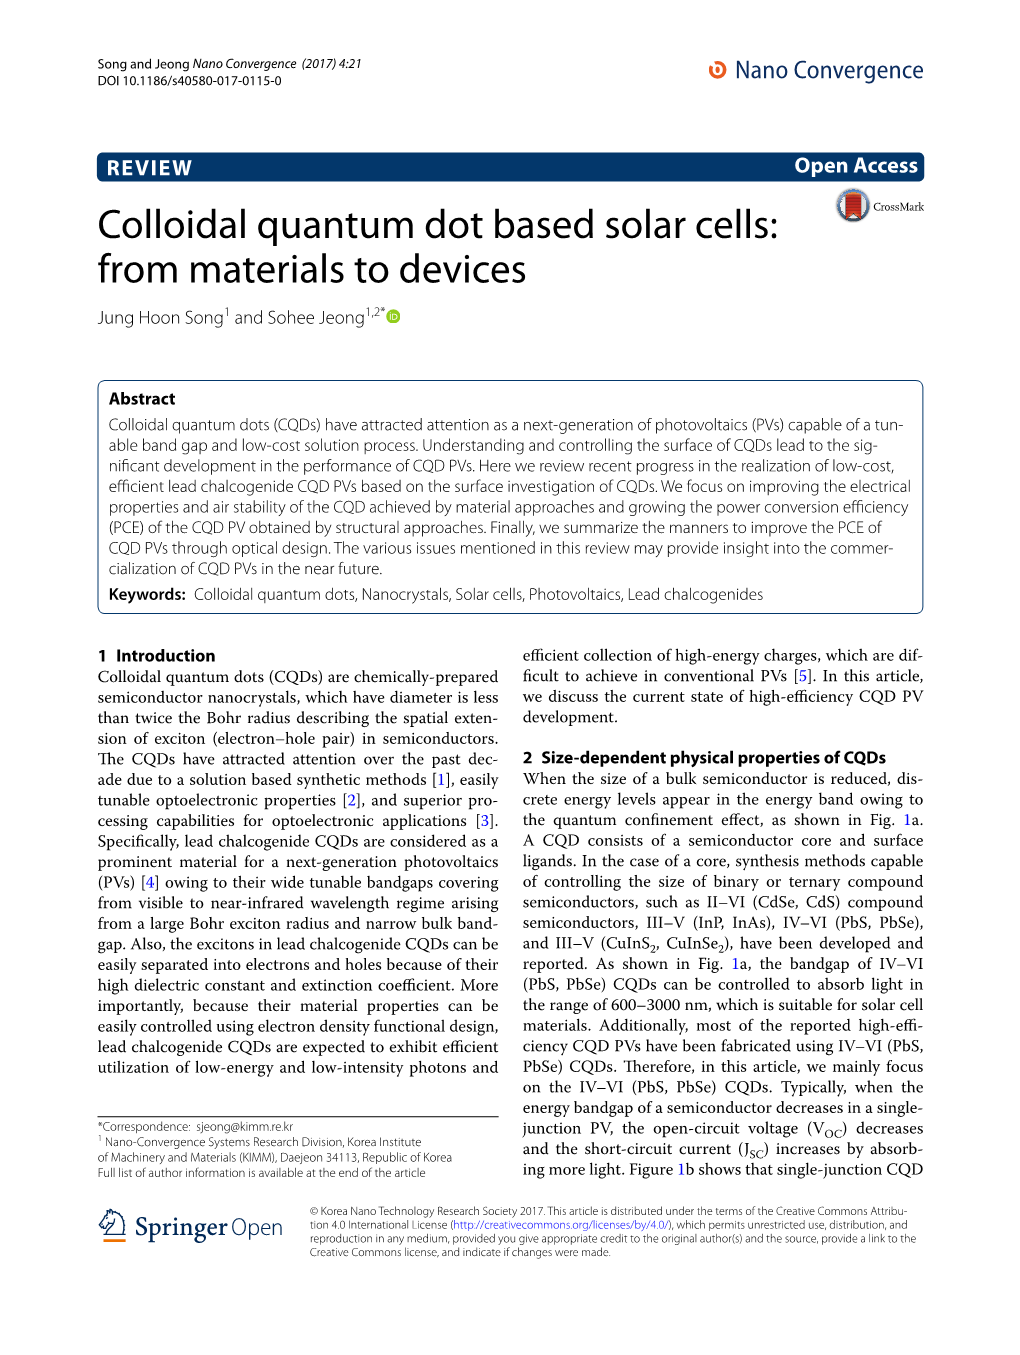 Colloidal Quantum Dot Based Solar Cells: from Materials to Devices Jung Hoon Song1 and Sohee Jeong1,2*